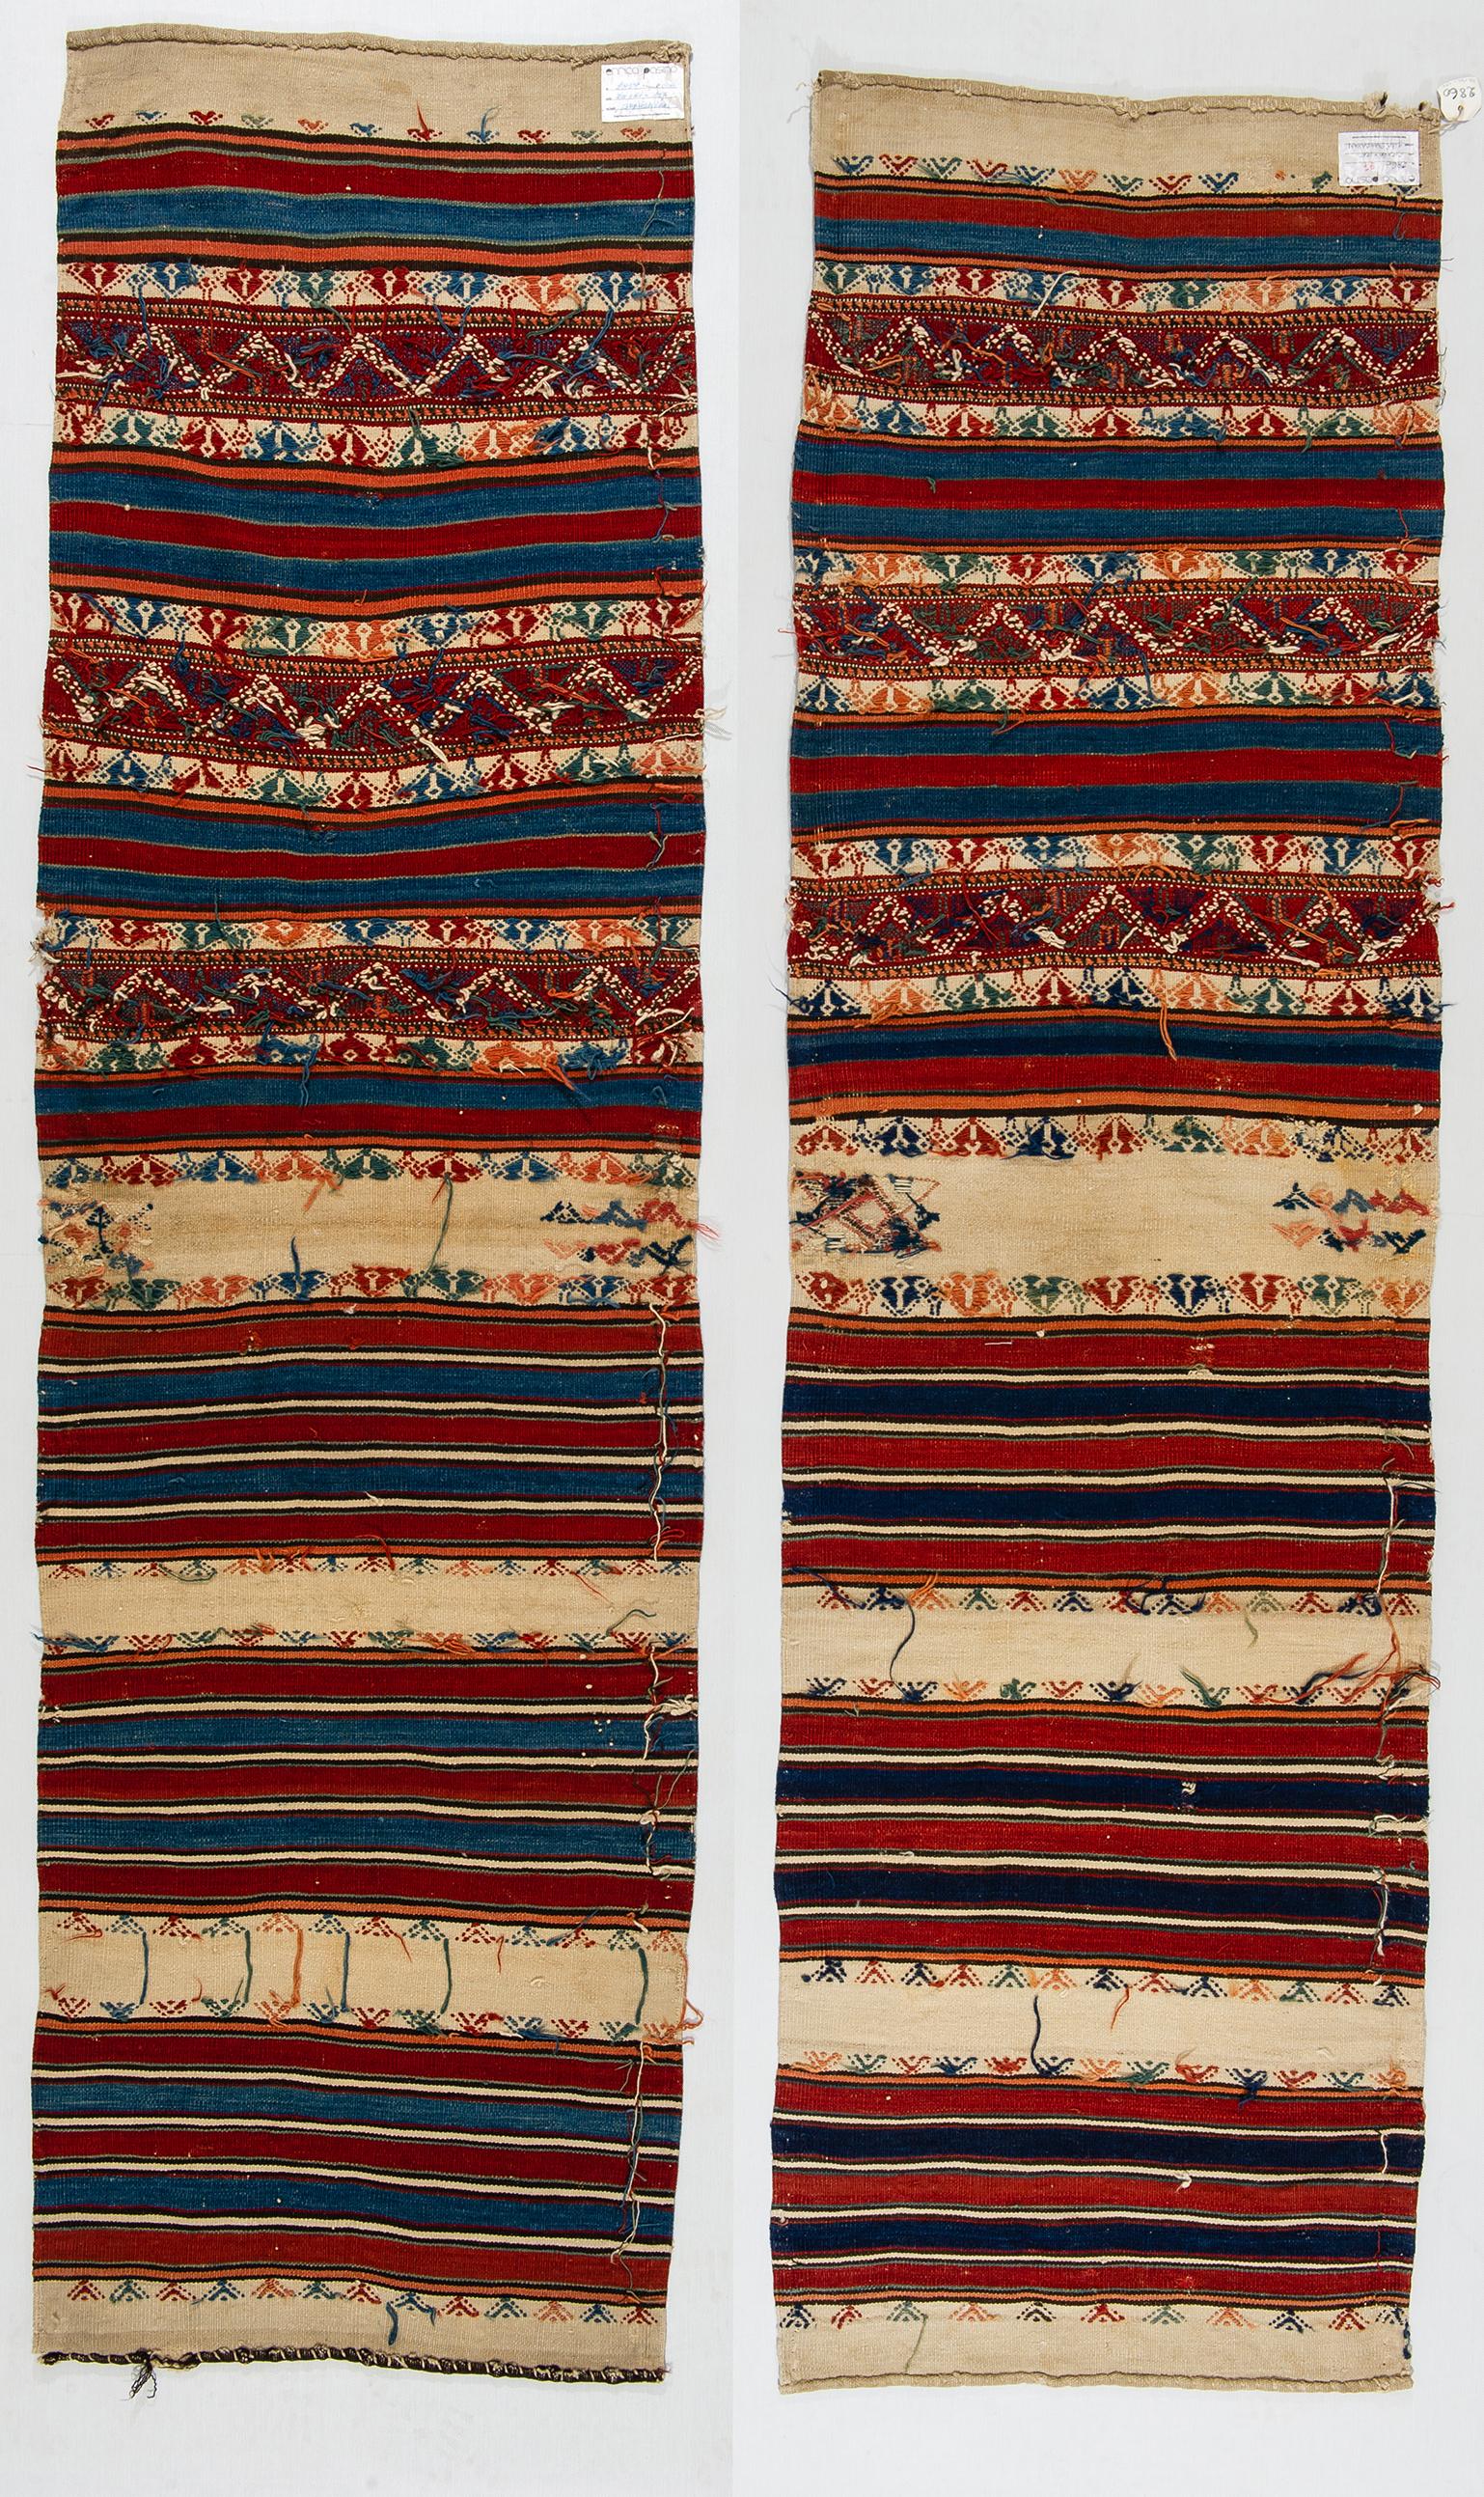 Rare pair of antique kilim runners from Kurdestan nomads, small embroideries adorn the striped decoration.
From private collection - (nr. 721 and 722).
They can be joined: everyone is cm. 212 x 60  .  ( x 2 = 212 x 120  or 424 x 60) -


  